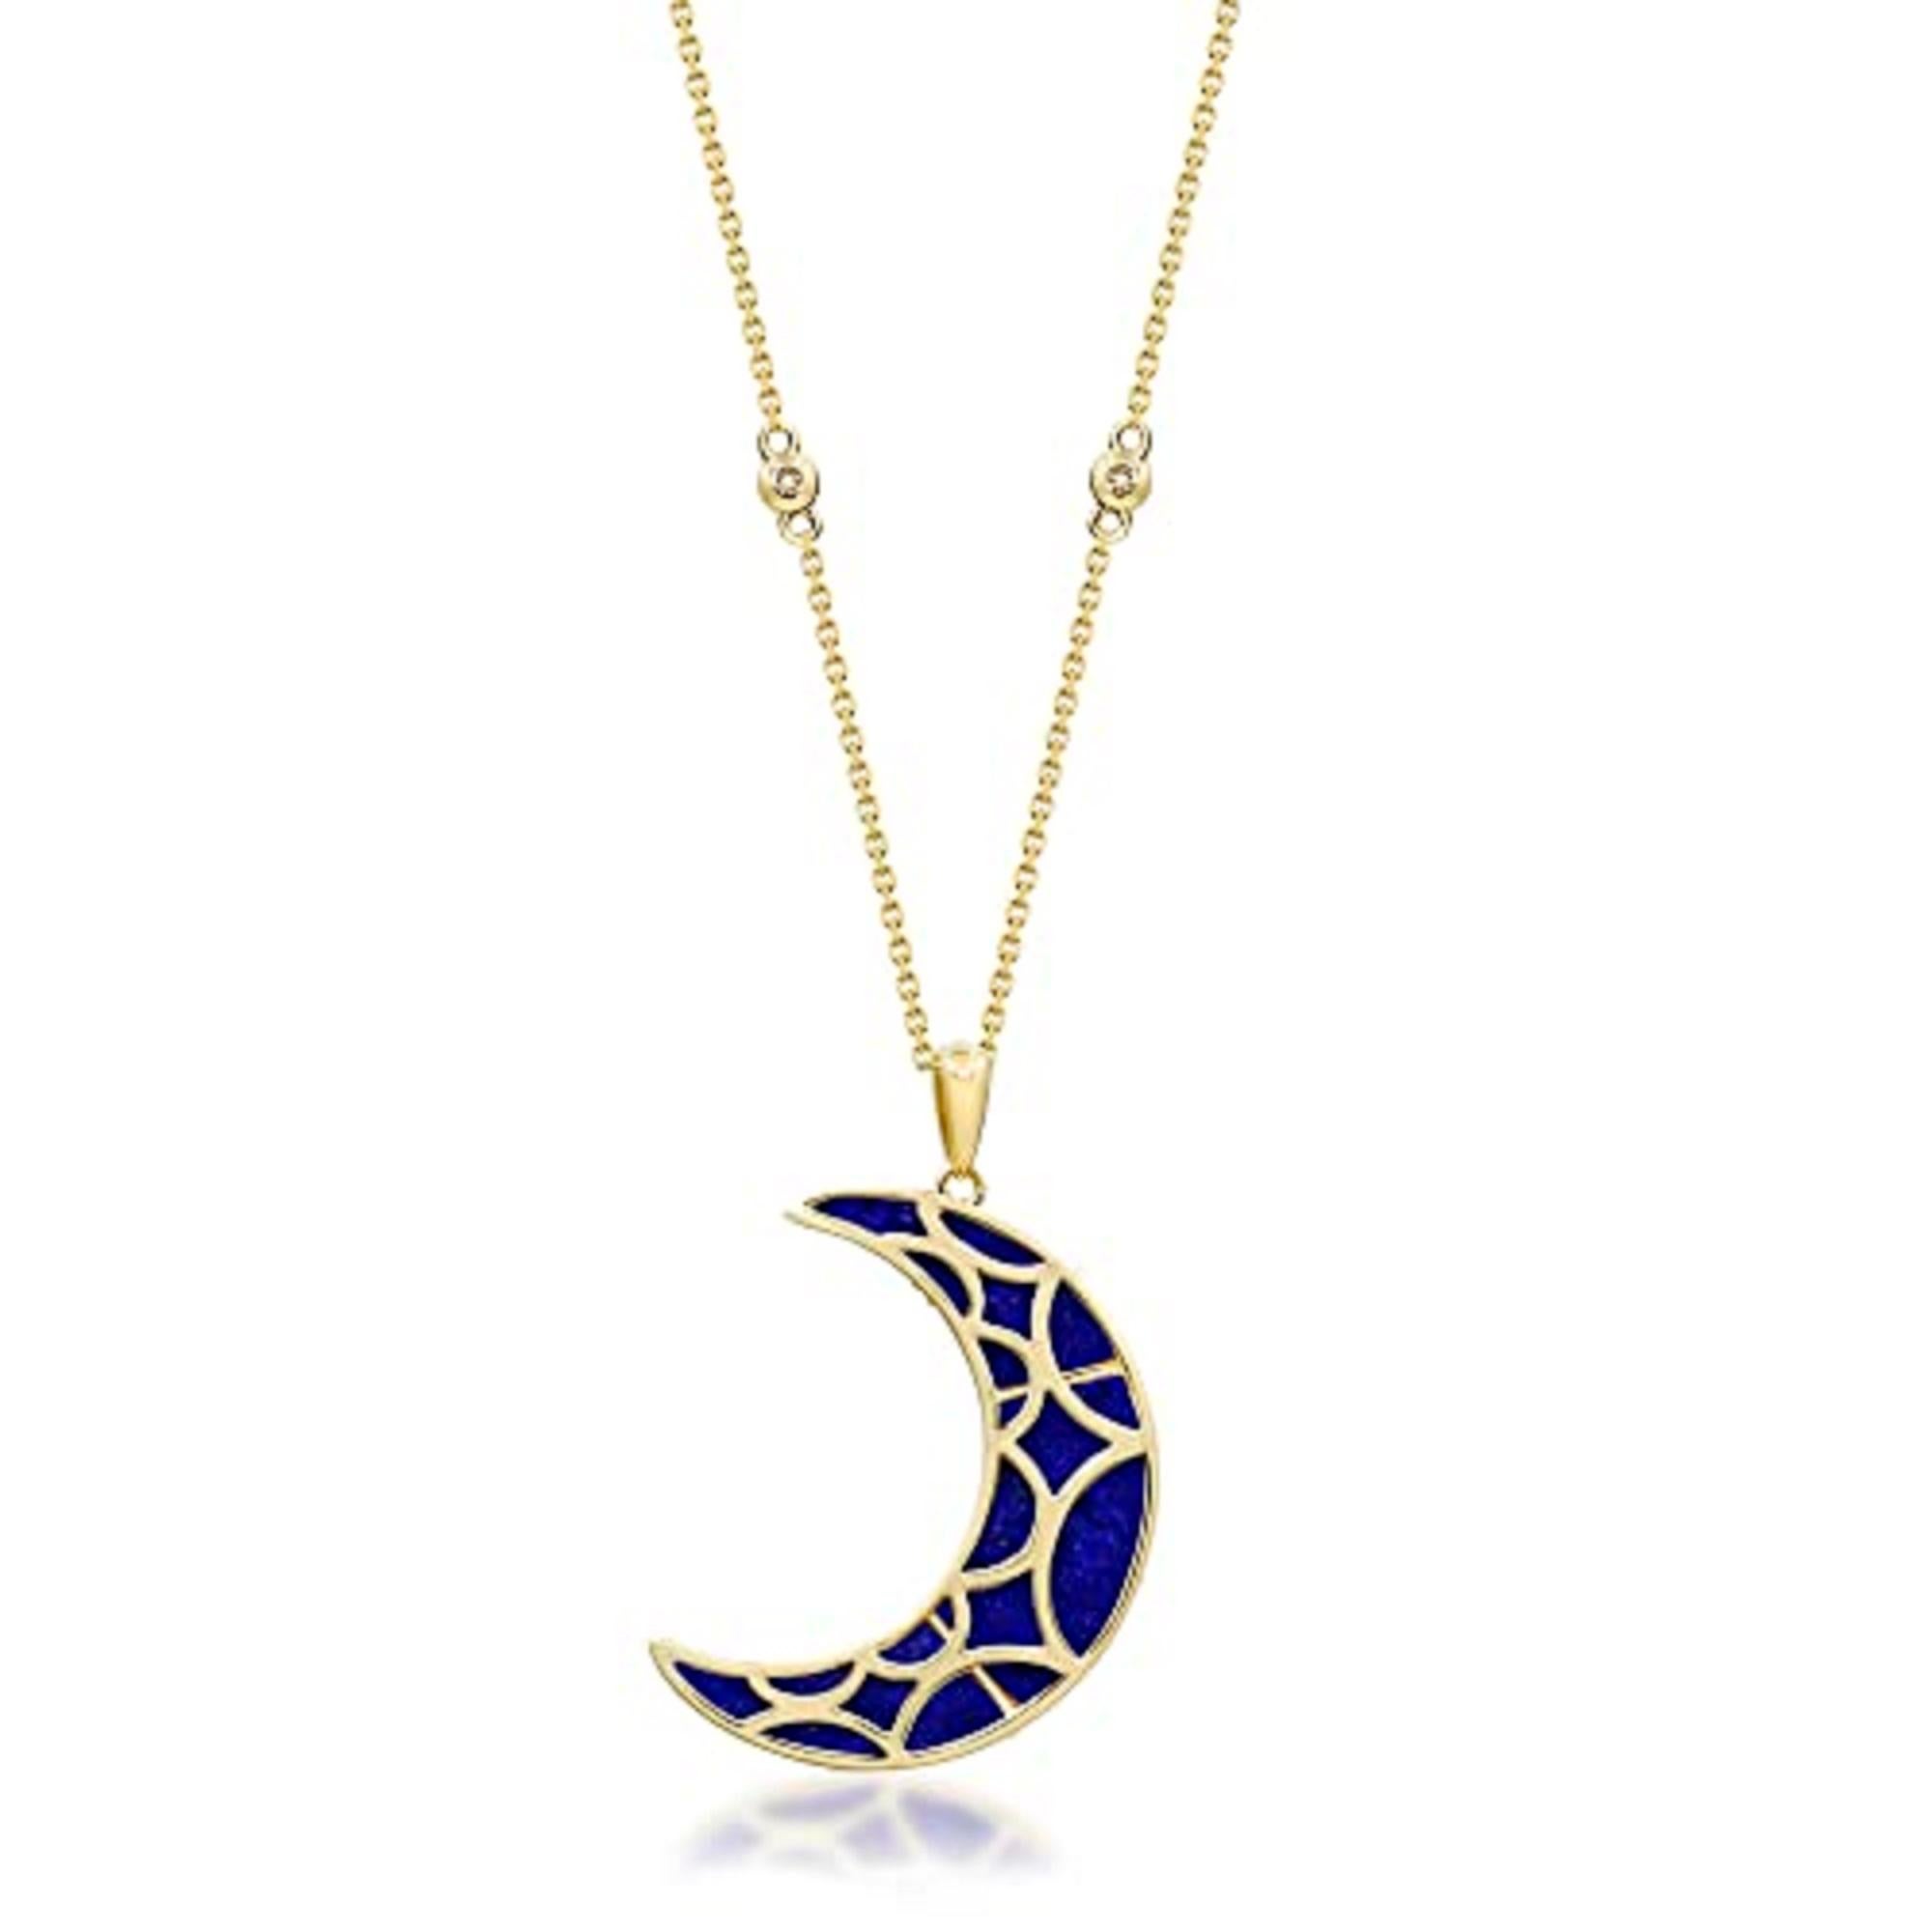 Cabochon Gin & Grace 14K Yellow Gold Genuine Lapis Pendant with Diamonds for women.